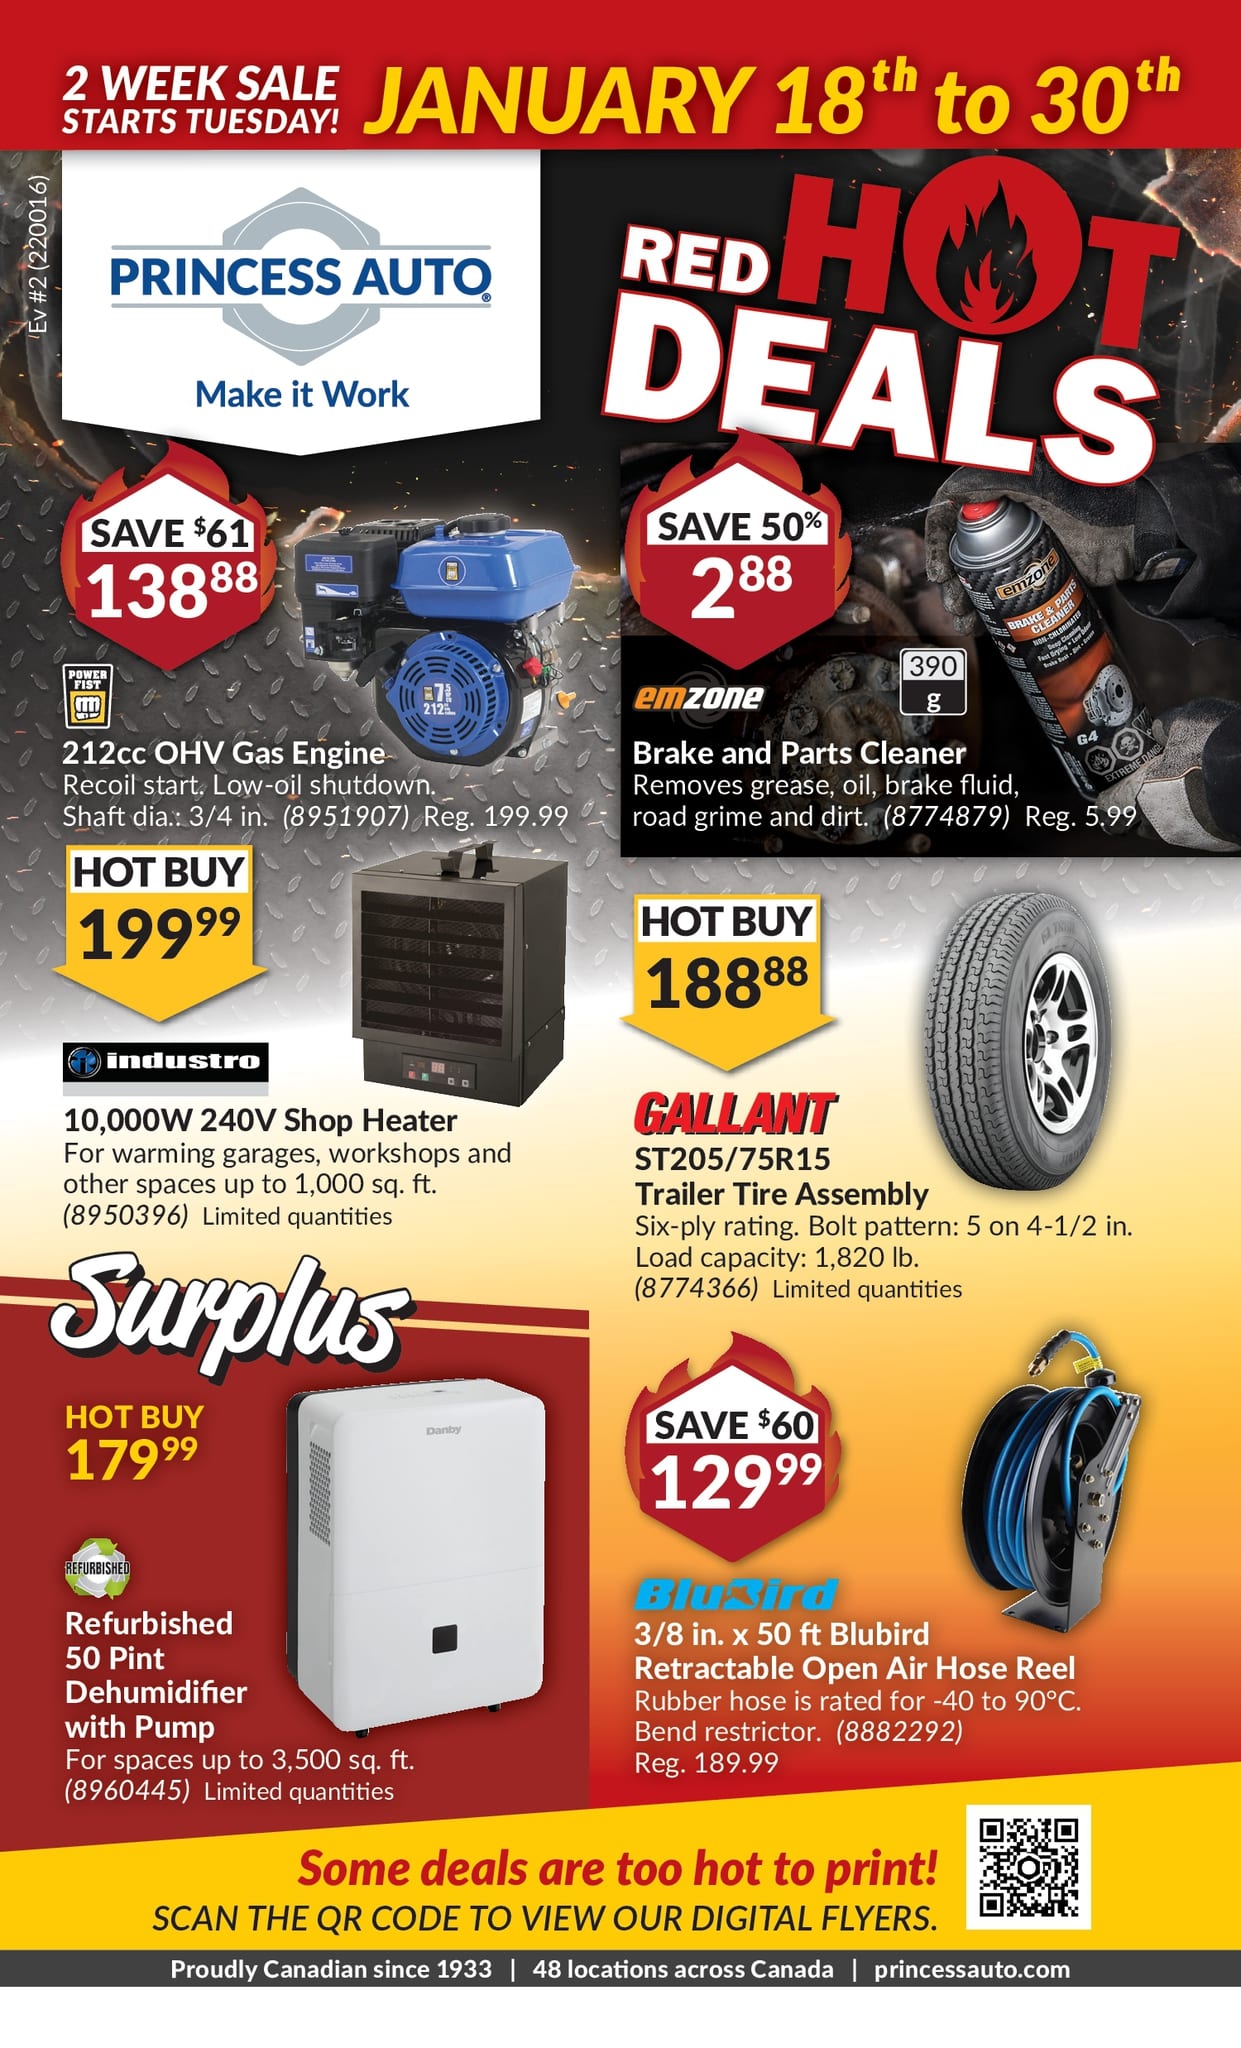 Princess Auto - Red Hot Deals - 2 Weeks of Savings